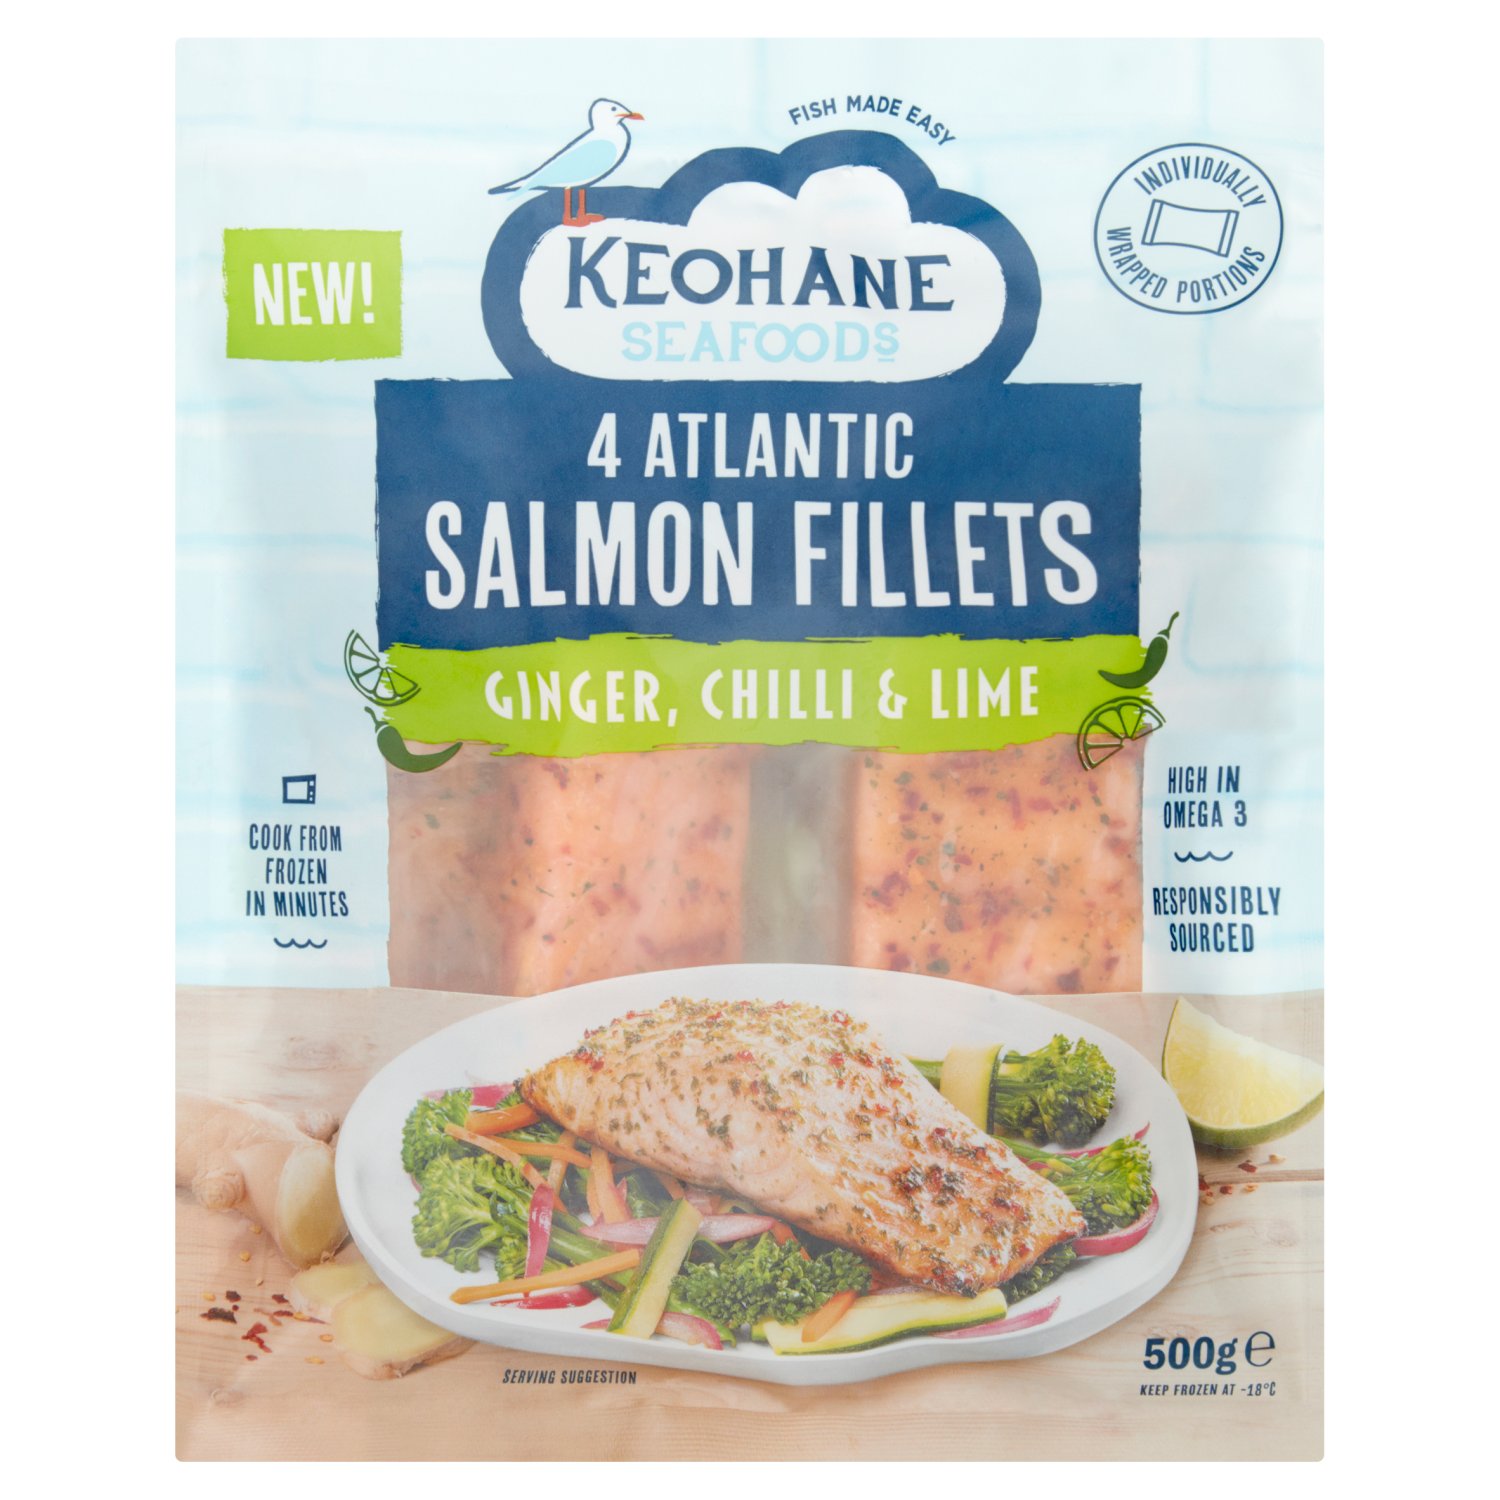 Keohane Seafoods Salmon Darnes With Ginger, Chilli And Lime Marinade (500 g)